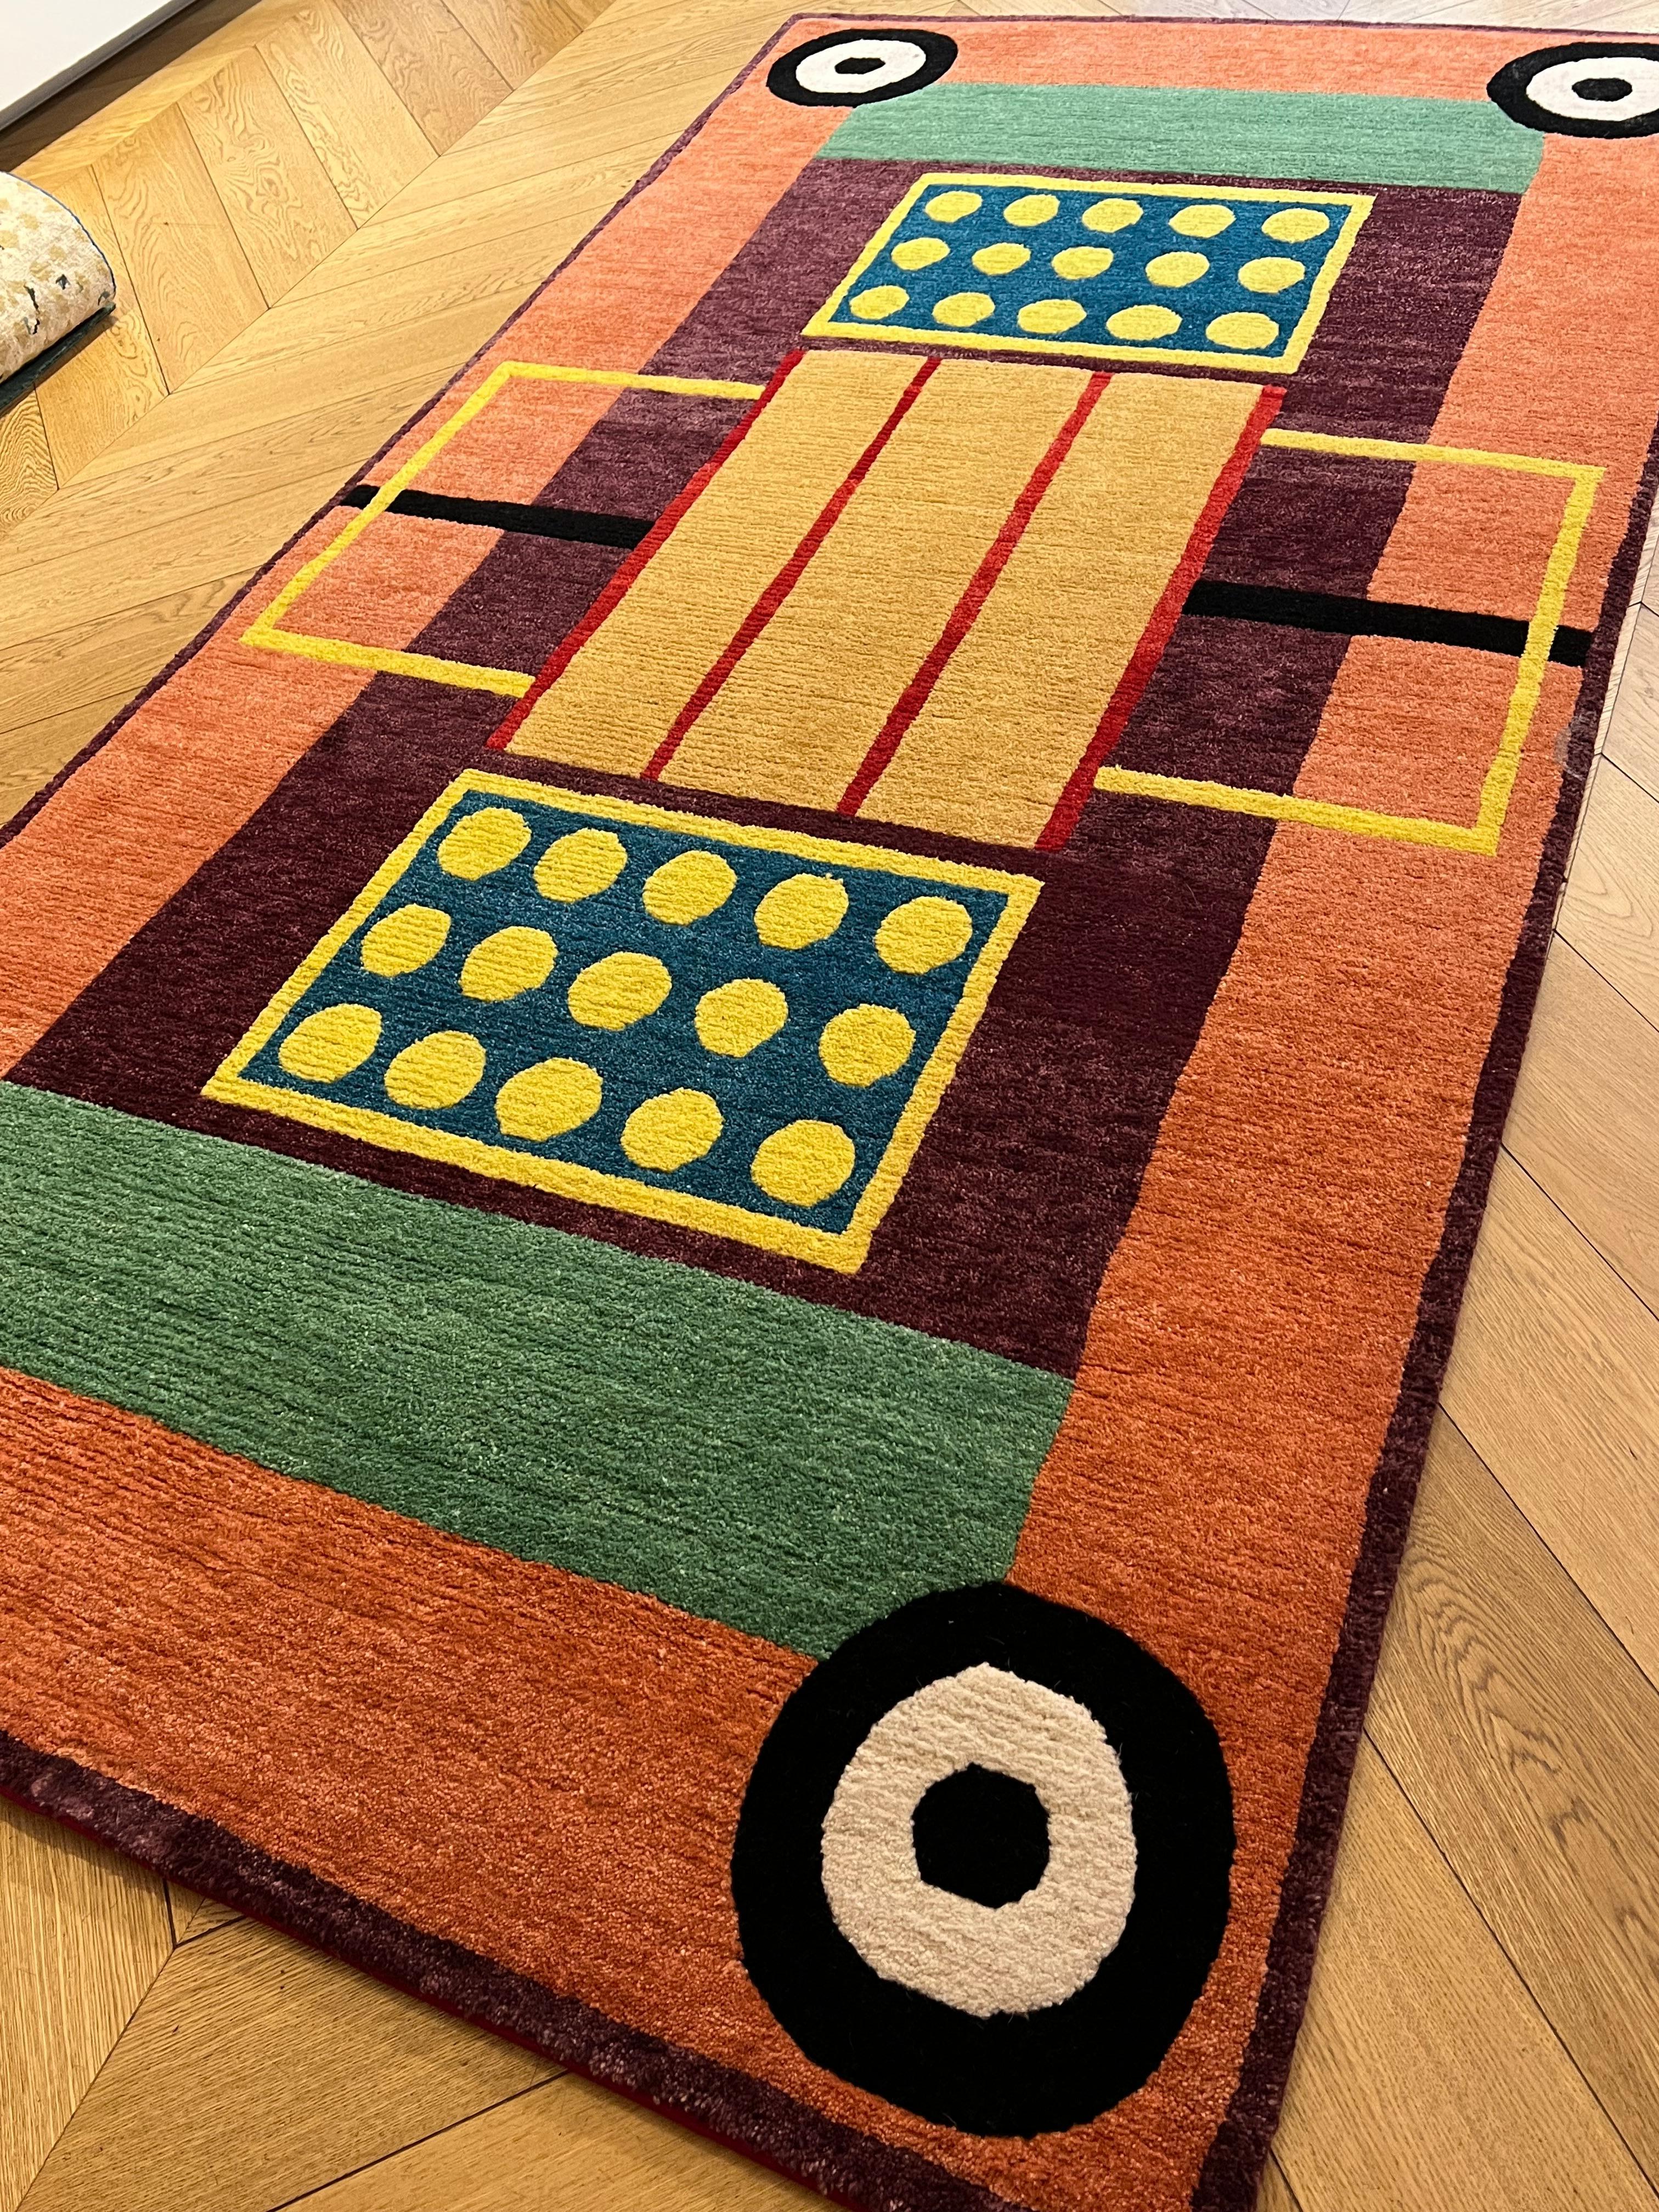 Contemporary 20th Century Rug Nathalie Du Pasquier 2003 Limited Edition For Sale